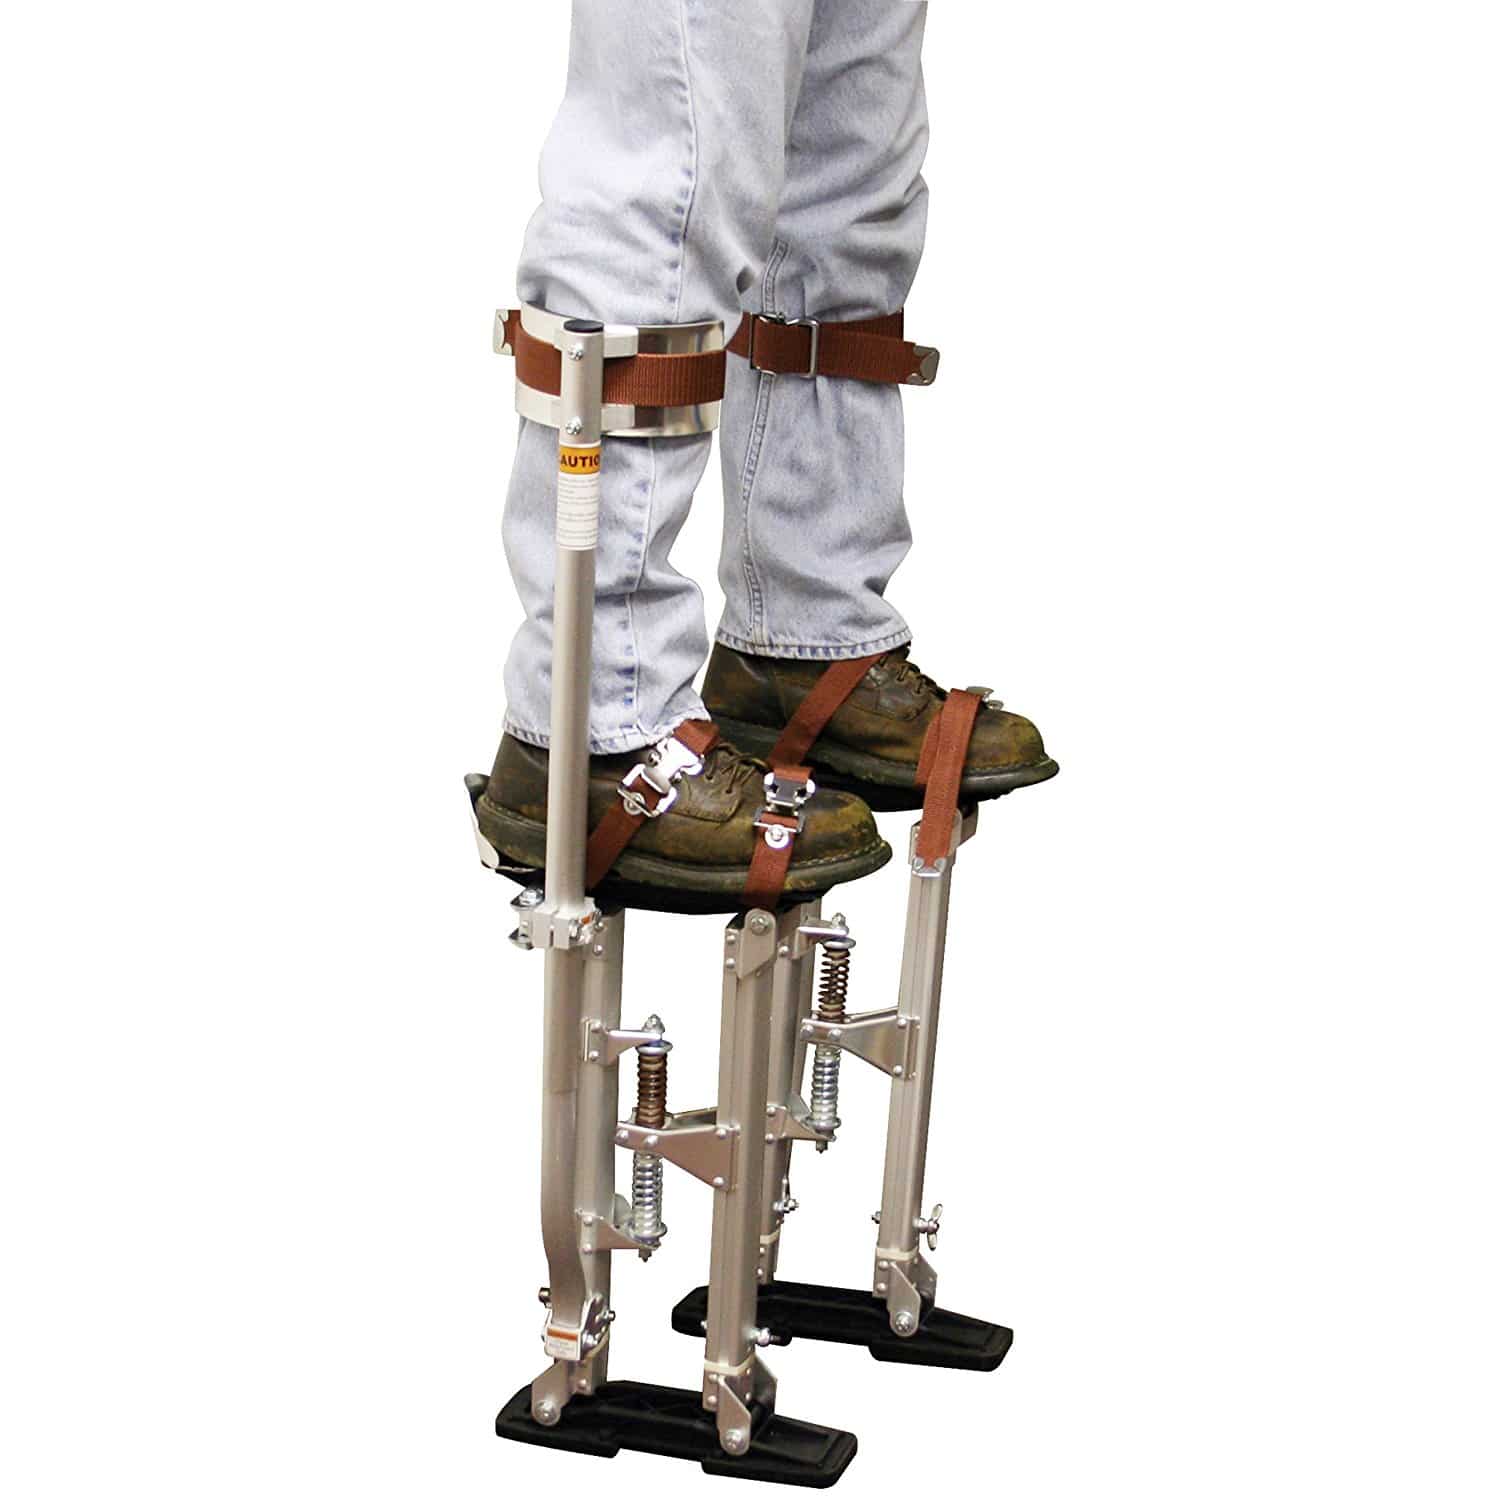 reviews and comparisons of walking stilts